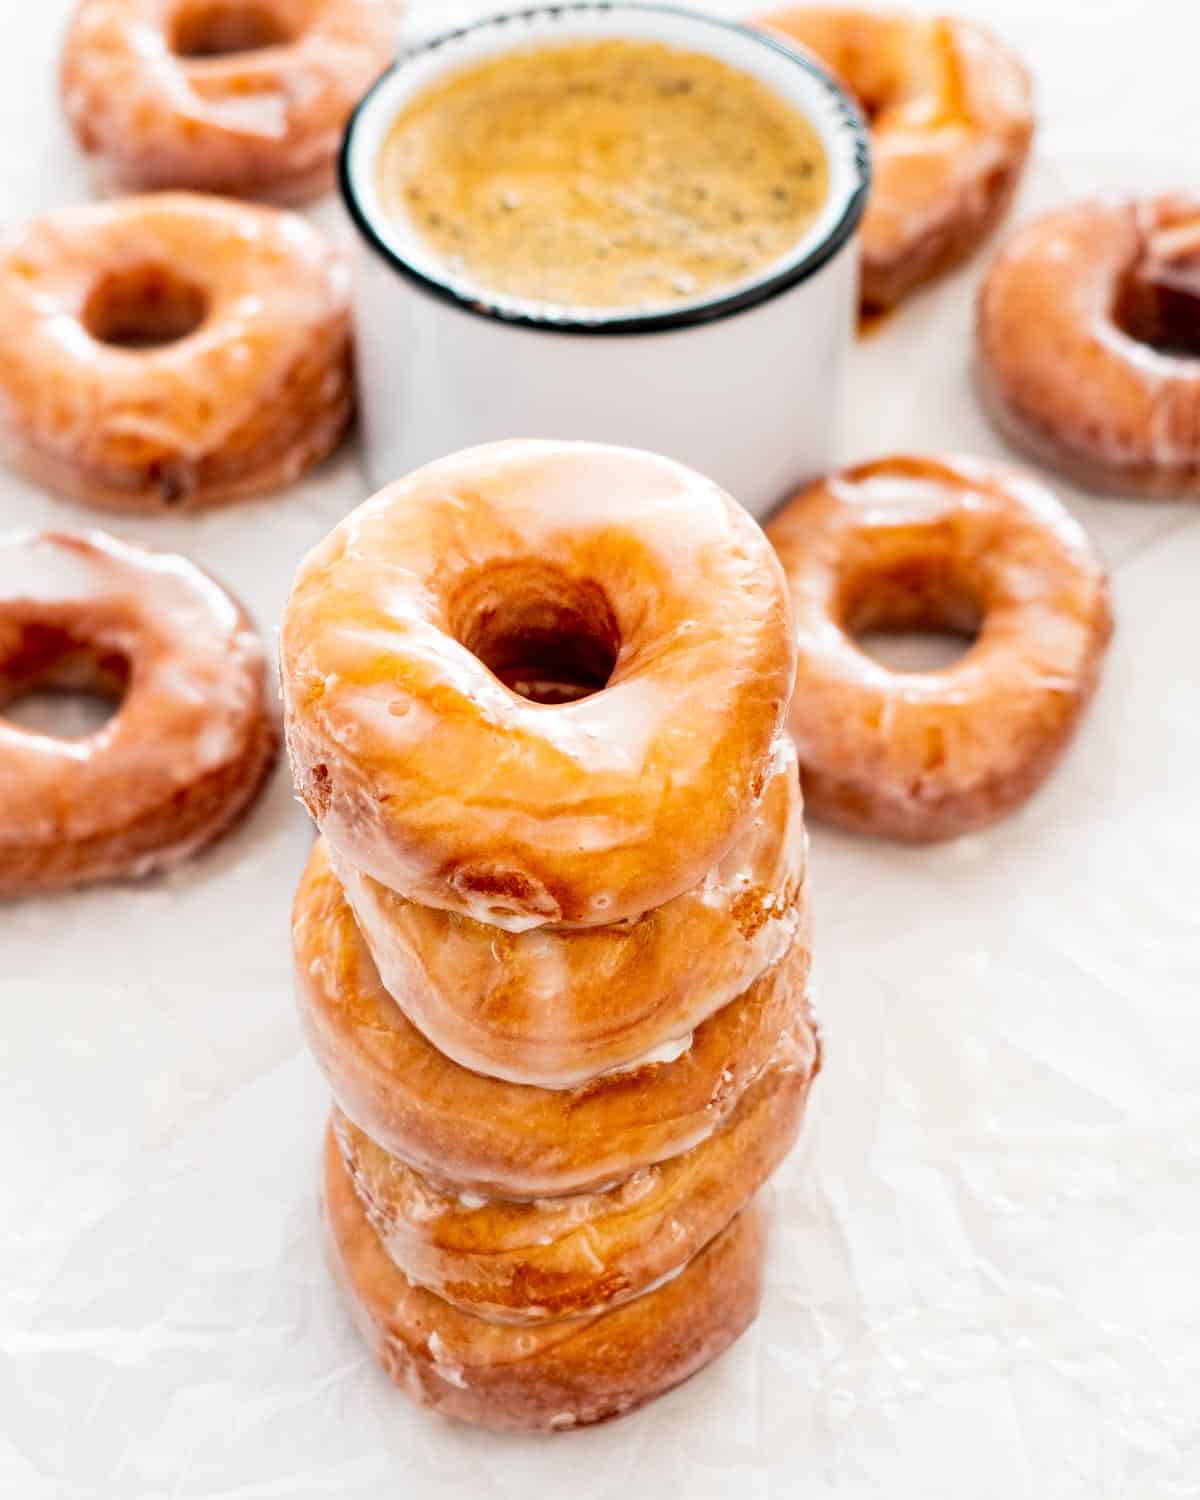 a stack of glazed donuts with a cup of coffee in the background.